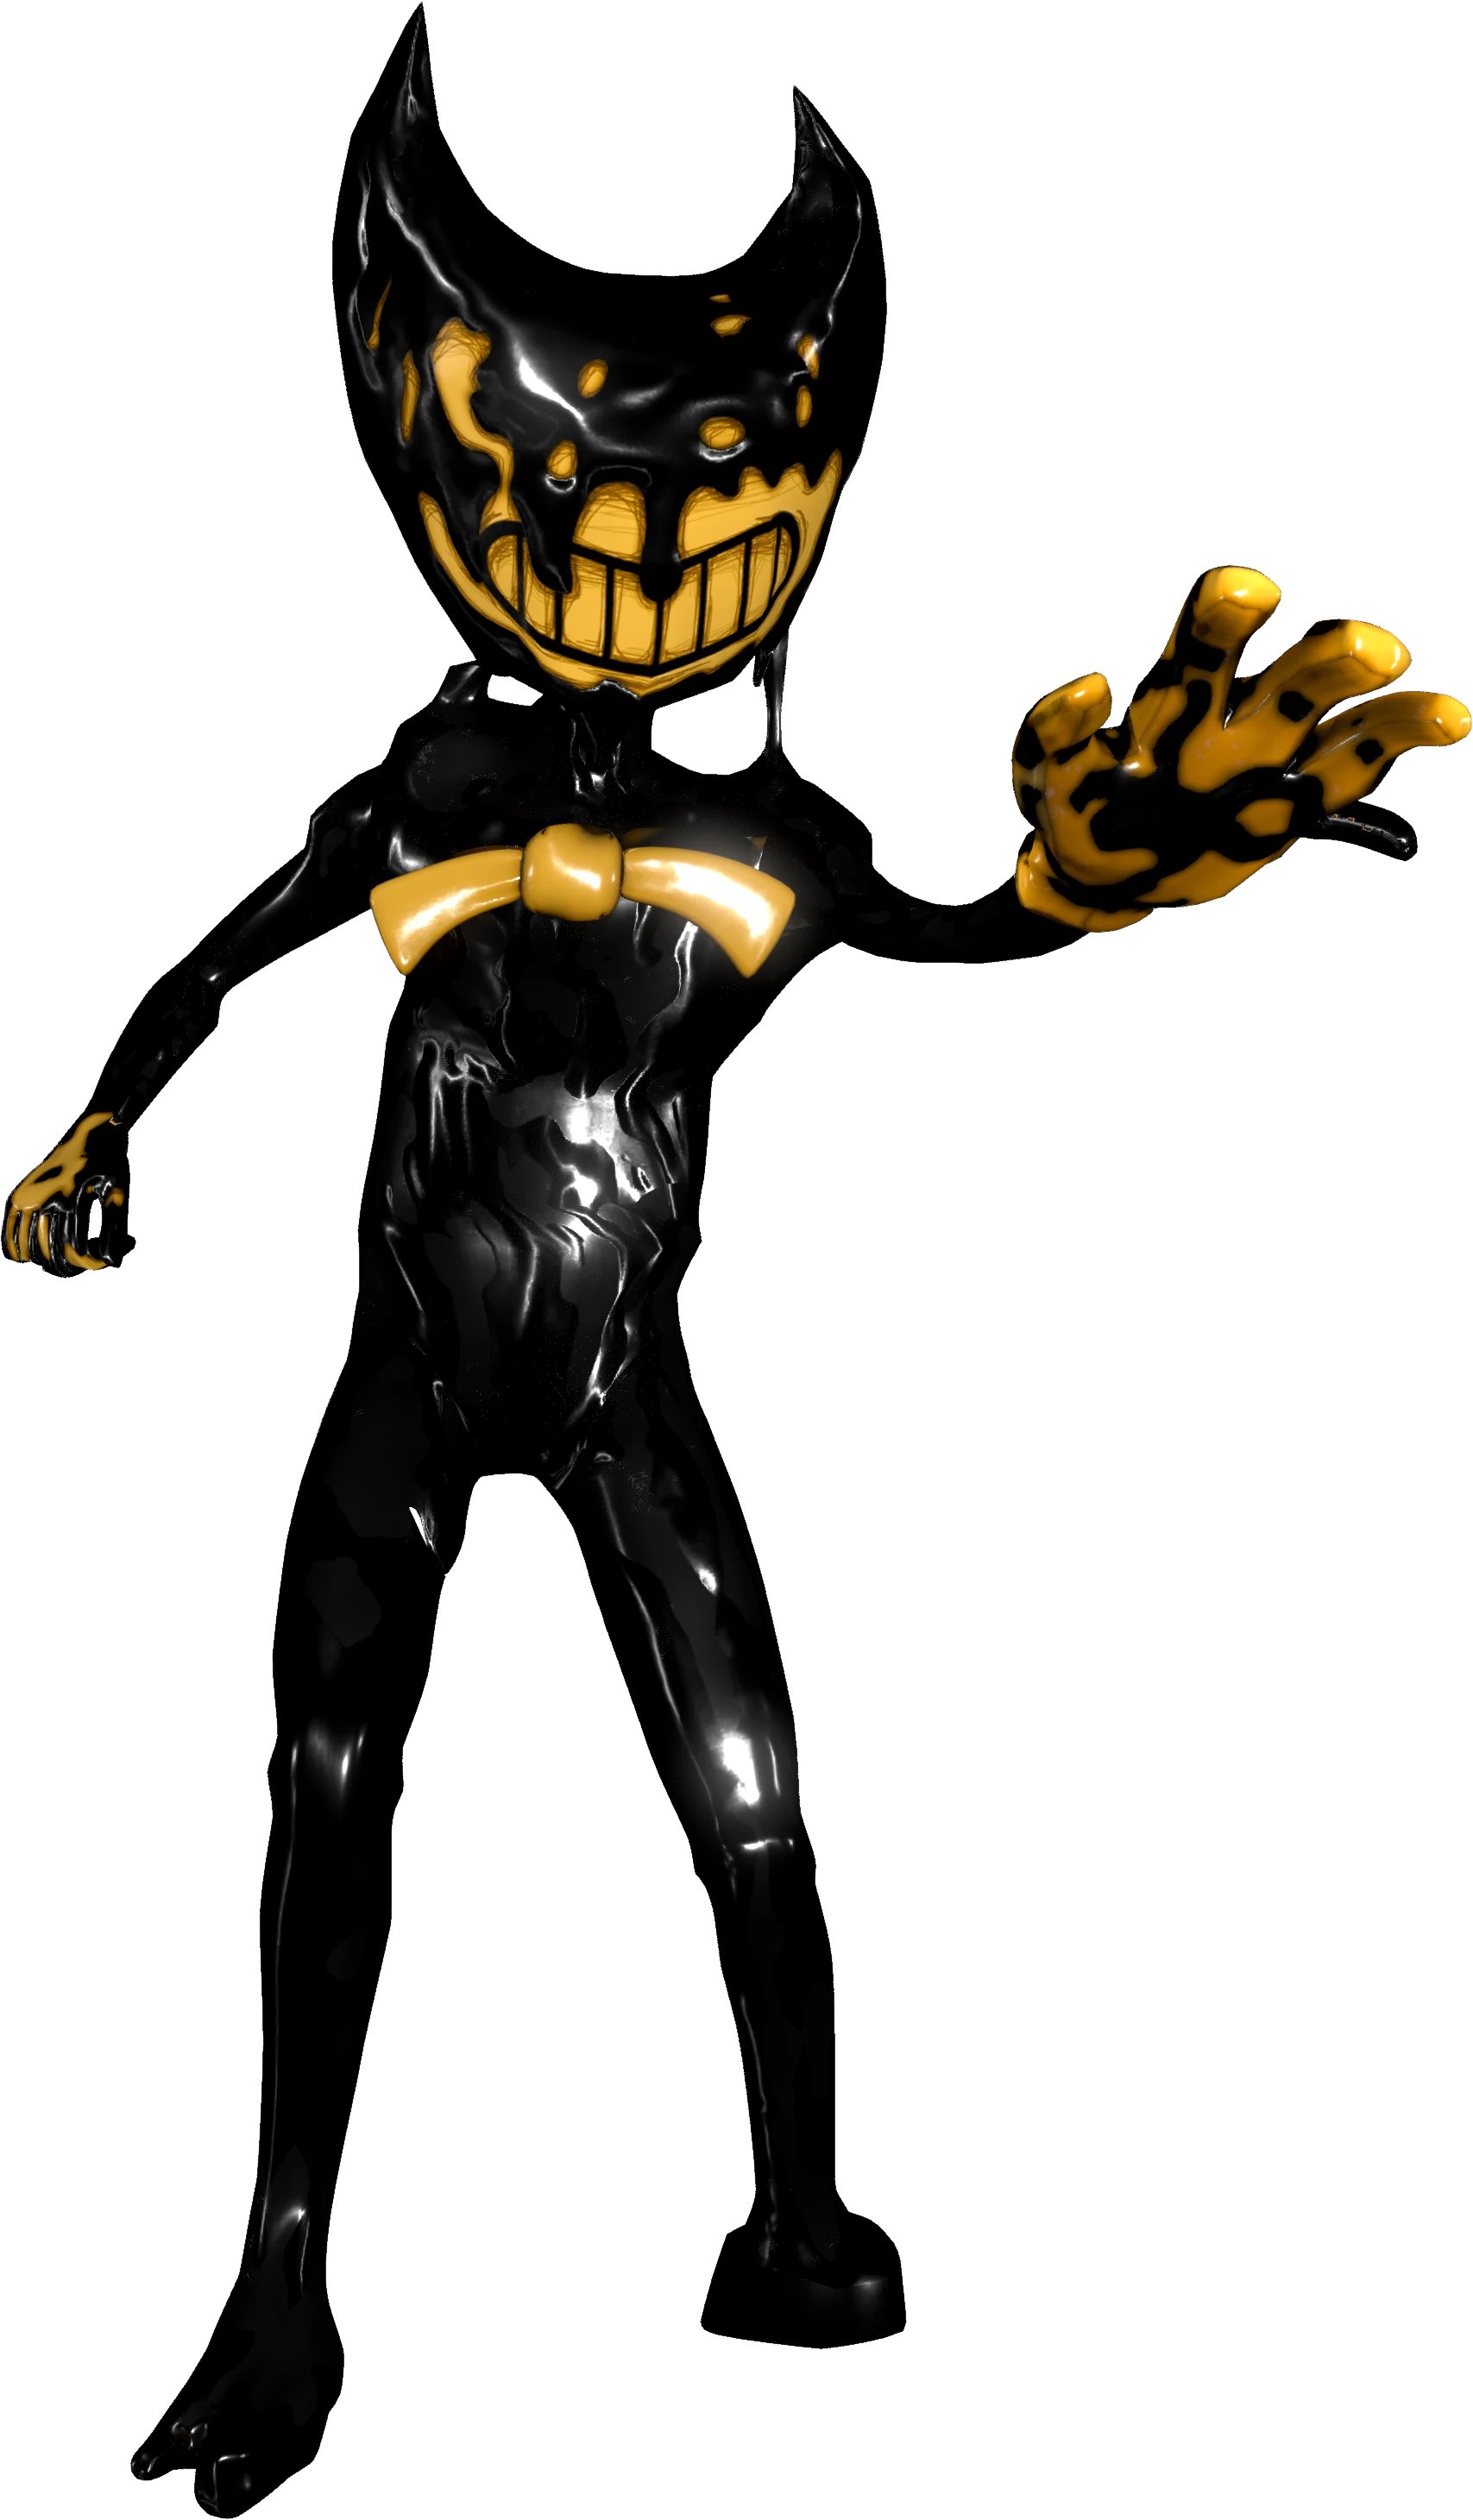 Bendy (a funky night) and Bendy (indie cross) sing NO VILLAINS! by